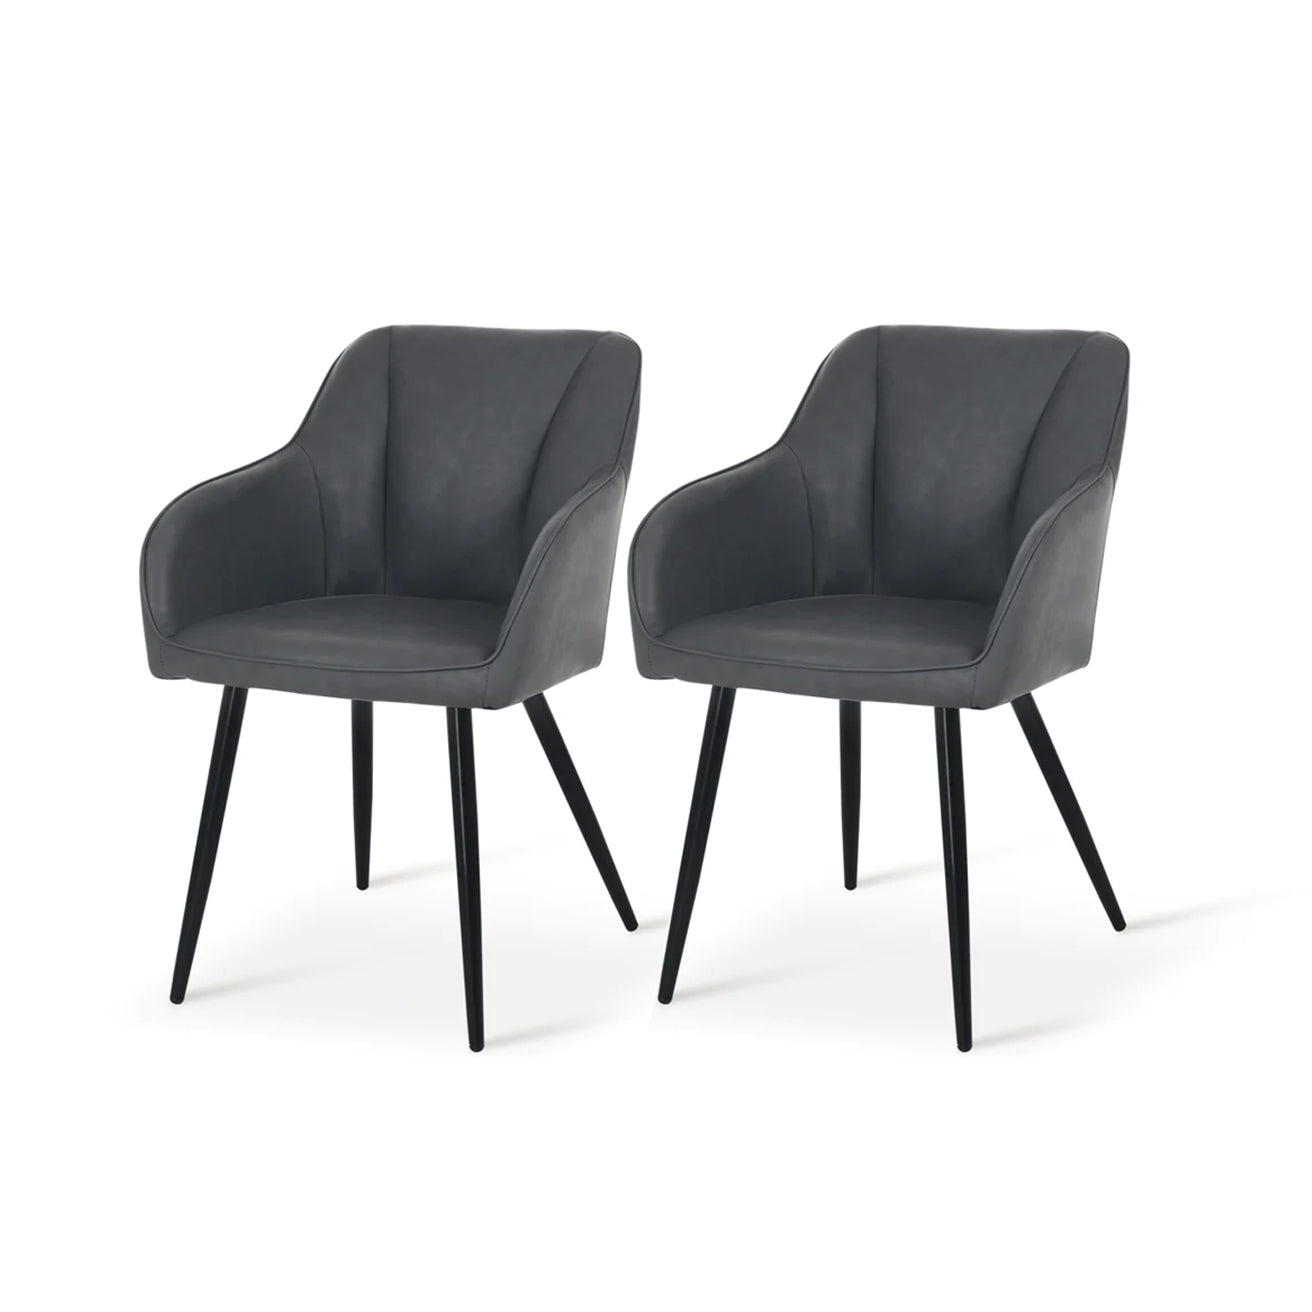 Sienna Dining Chairs [Set of 2] [Pu Leather]